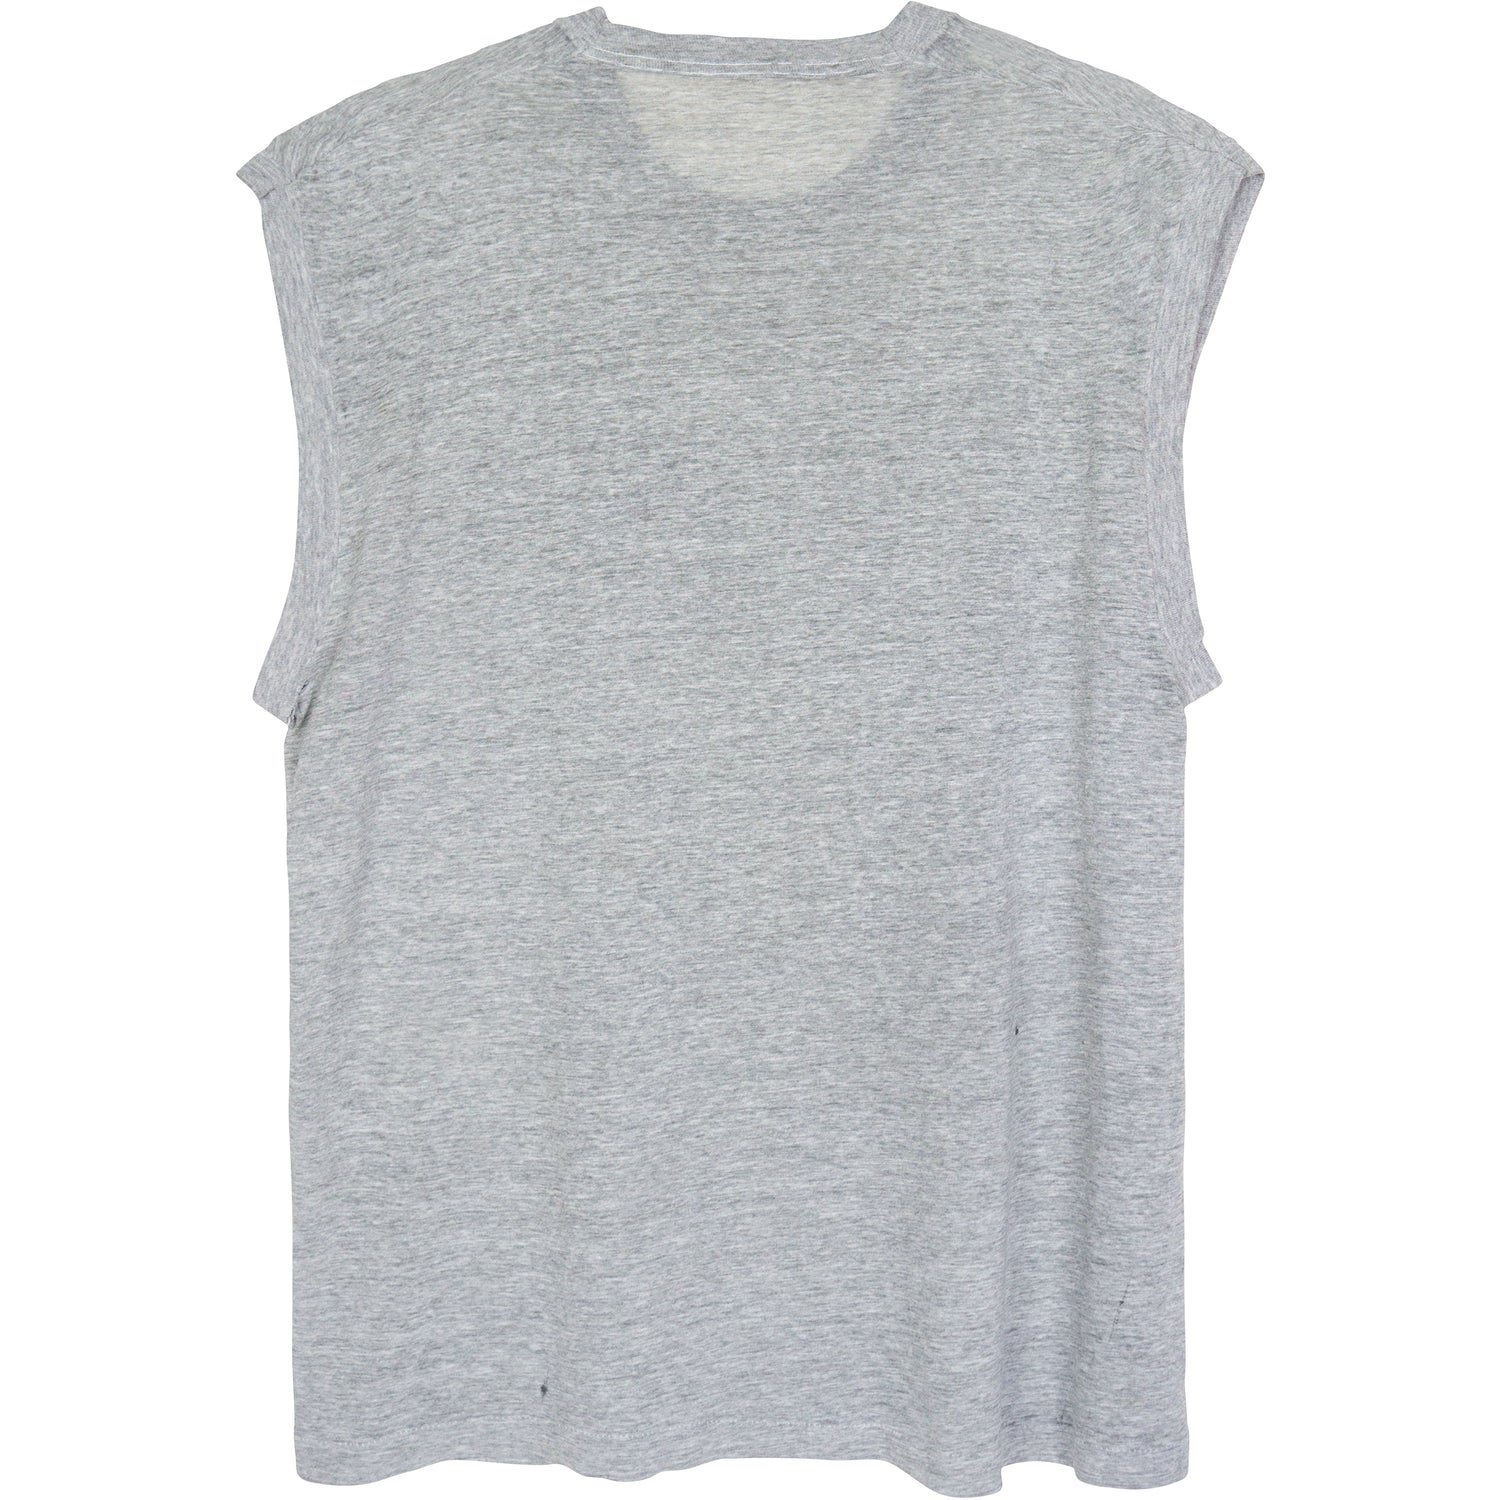 VINTAGE HEATHER GREY MUSCLE T-SHIRT